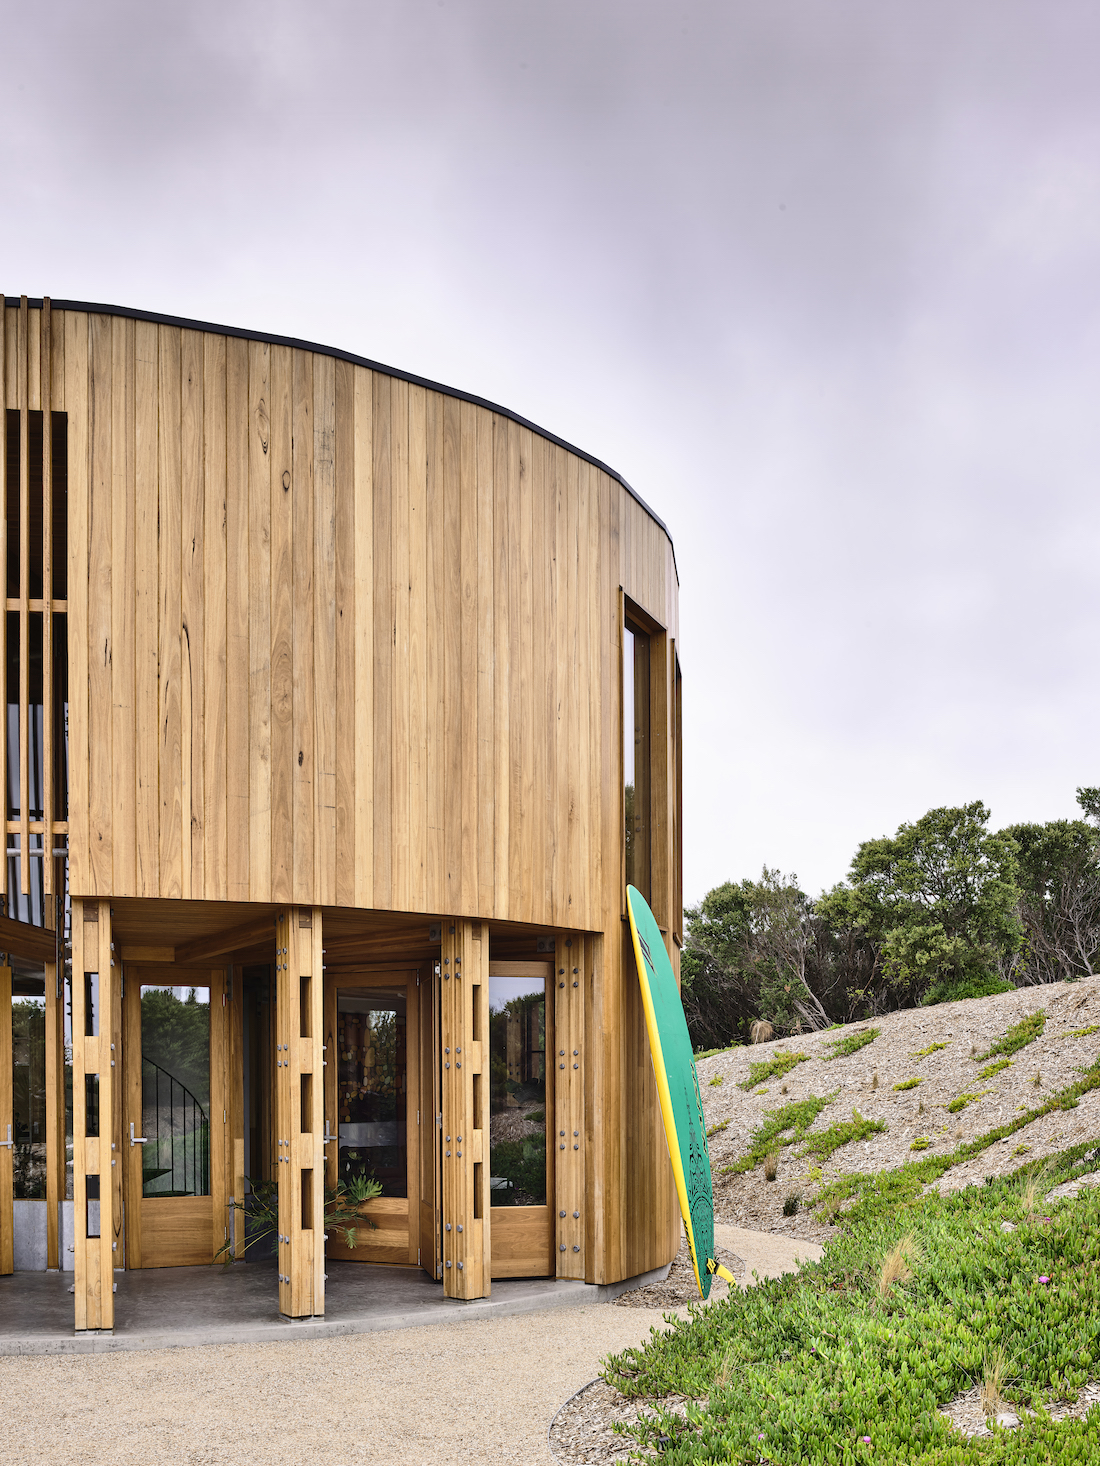 Round timber home in sand dunes with surfboard